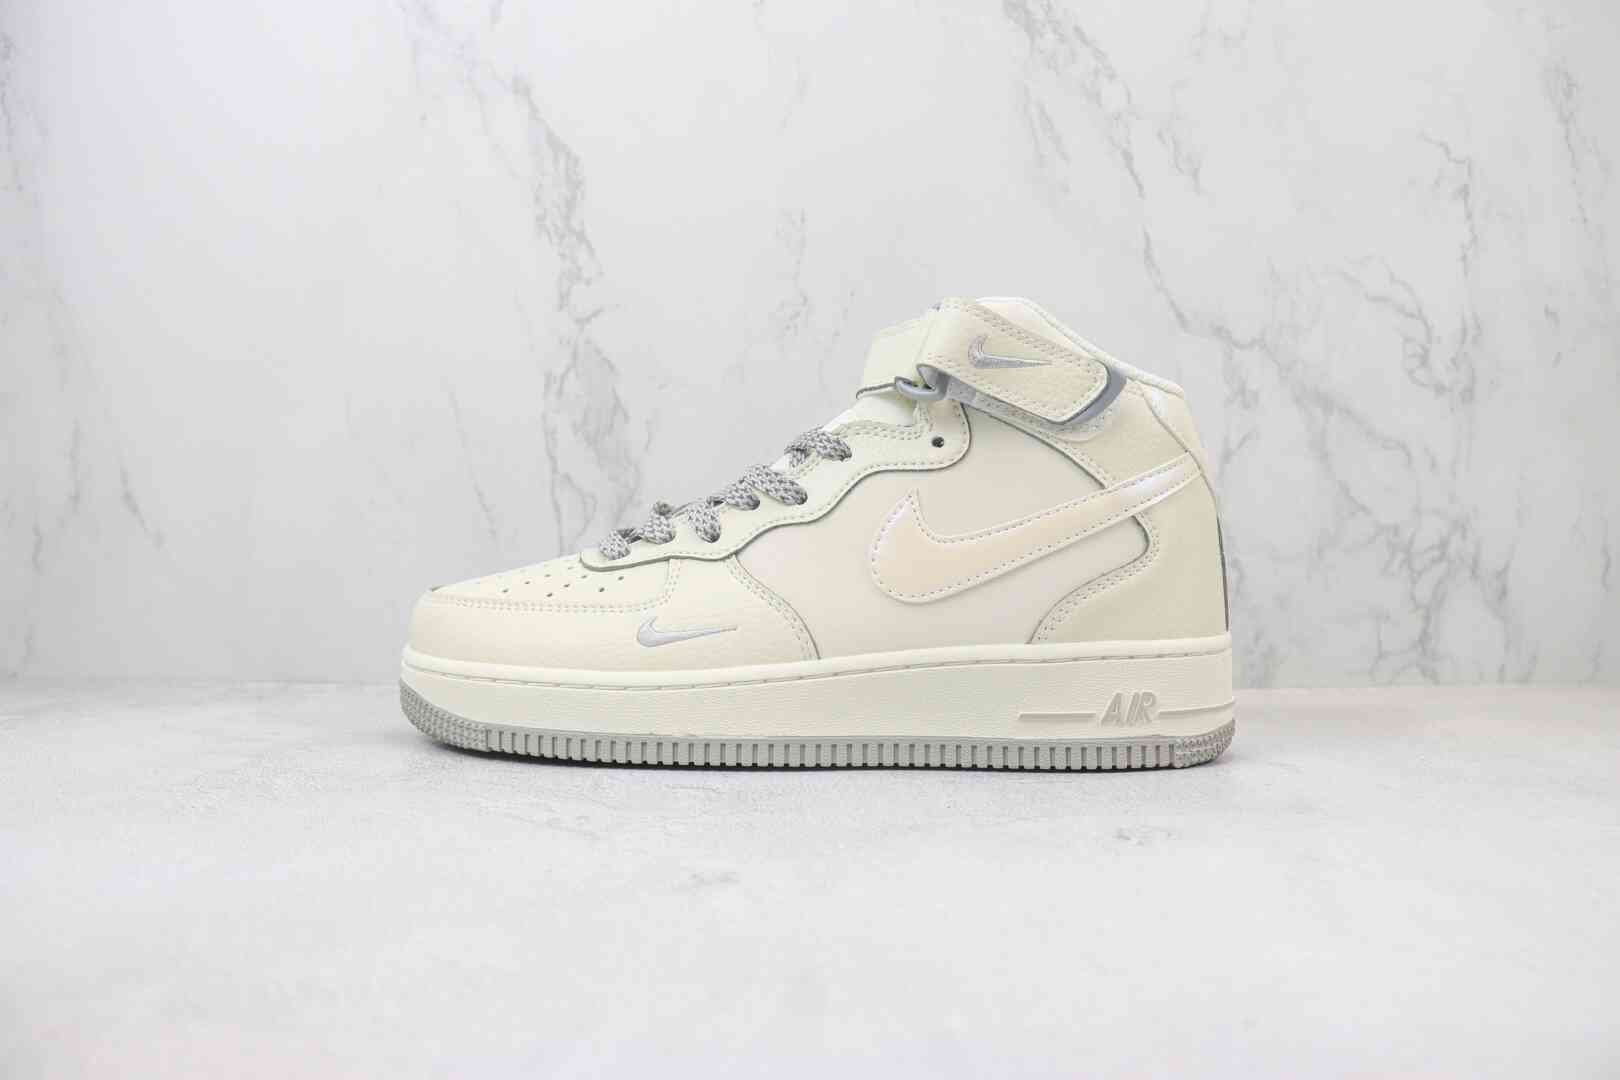 RO, PE, FORCE 1, Air Force 1 Mid, Air Force 1, AI - 空军 SG2356-806 珠光白灰 双勾 Air Force 1 Mid